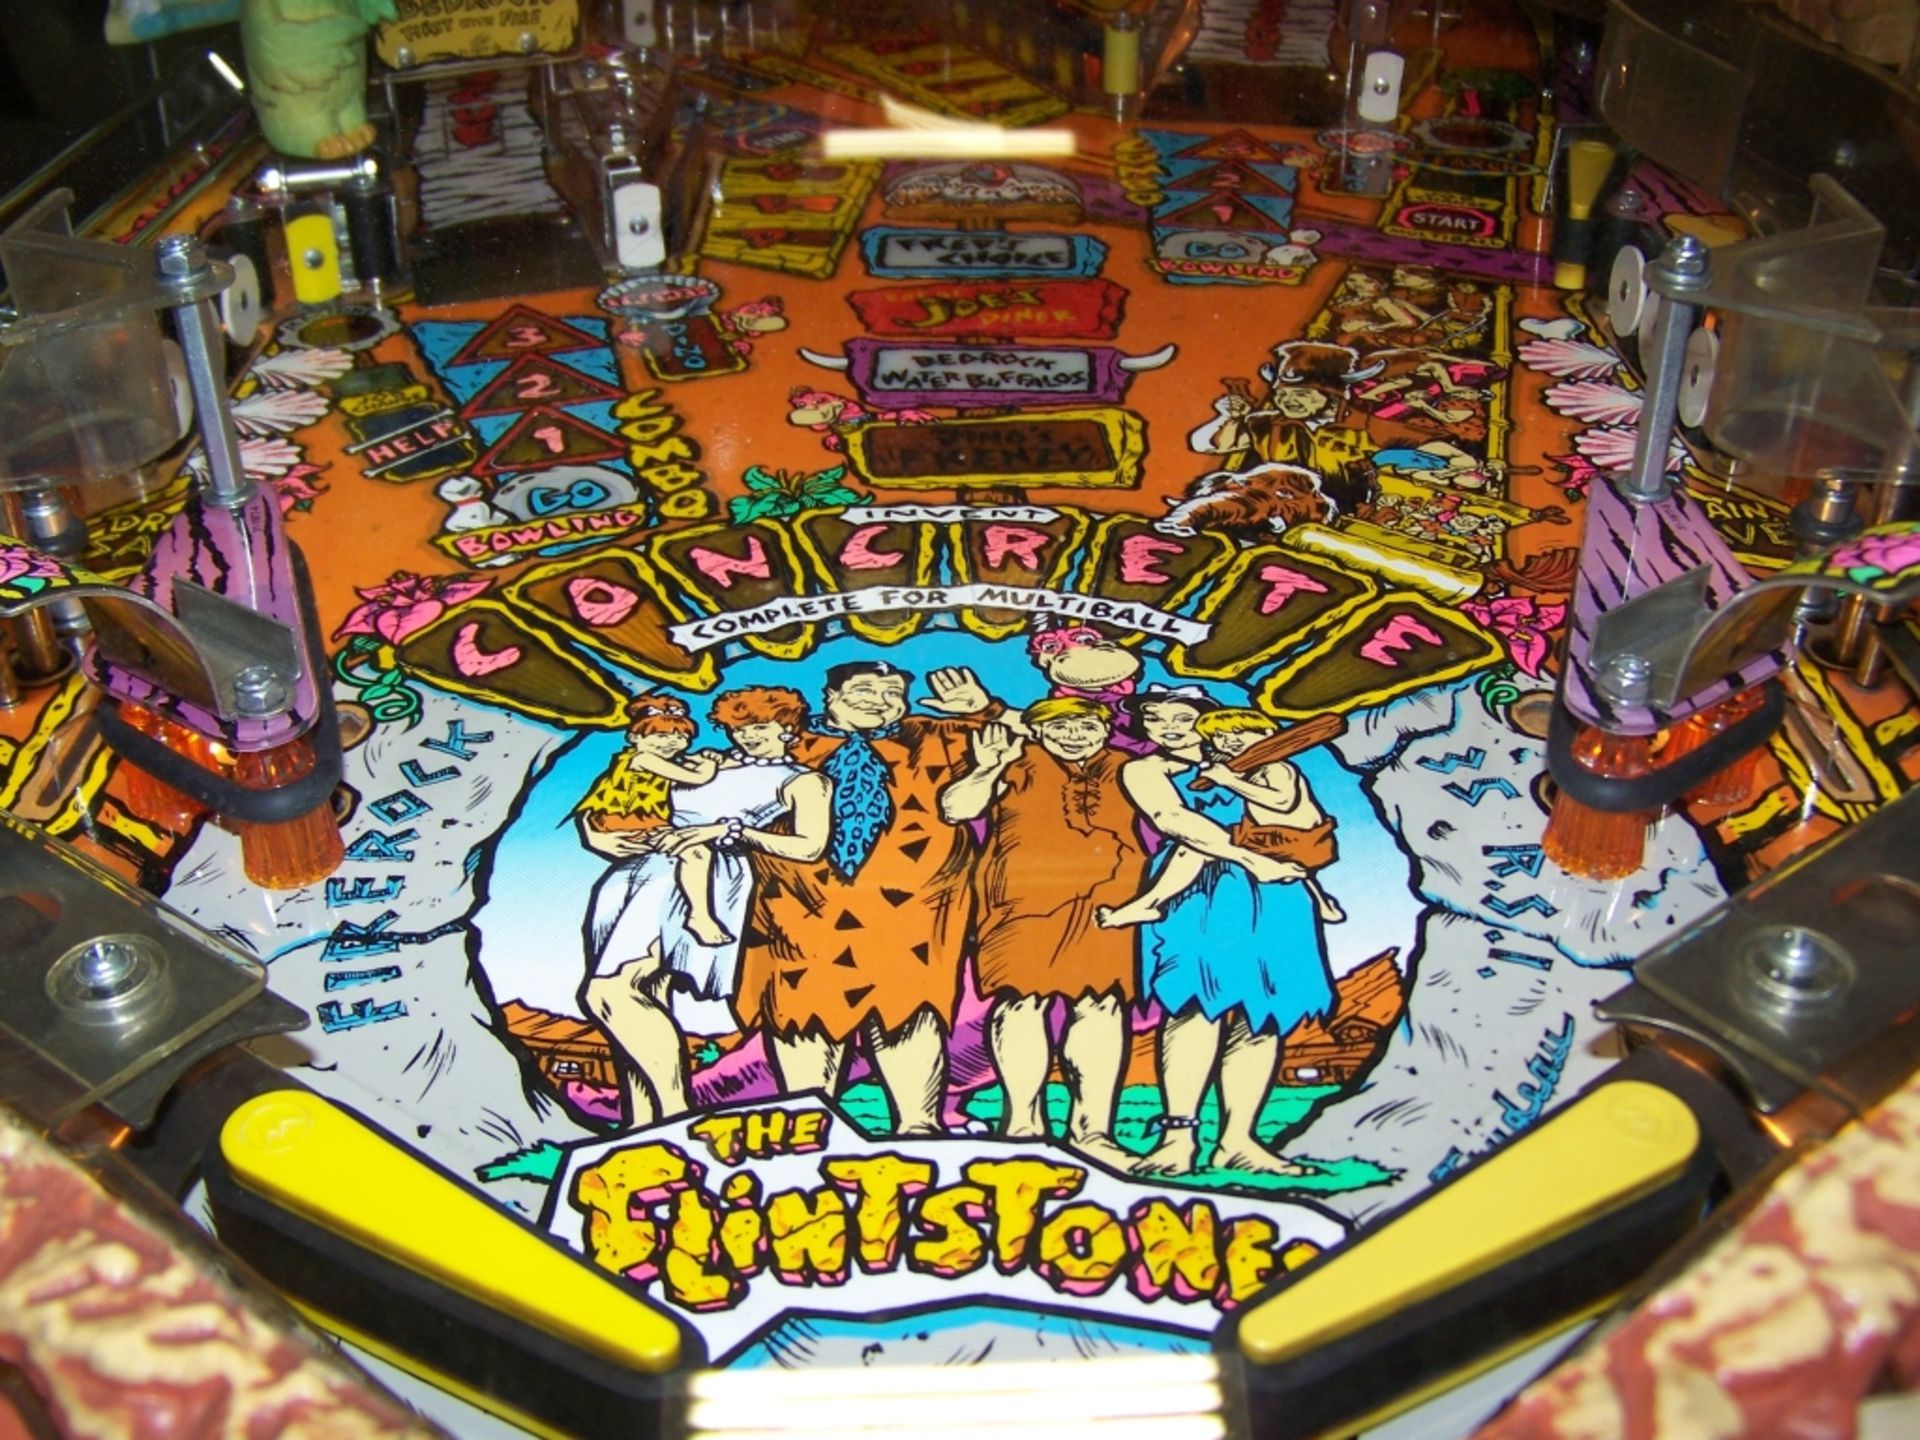 FLINSTONES THE MOVIE PINBALL MACHINE WILLIAMS 1994 Item is in used condition. Evidence of wear and - Image 3 of 11